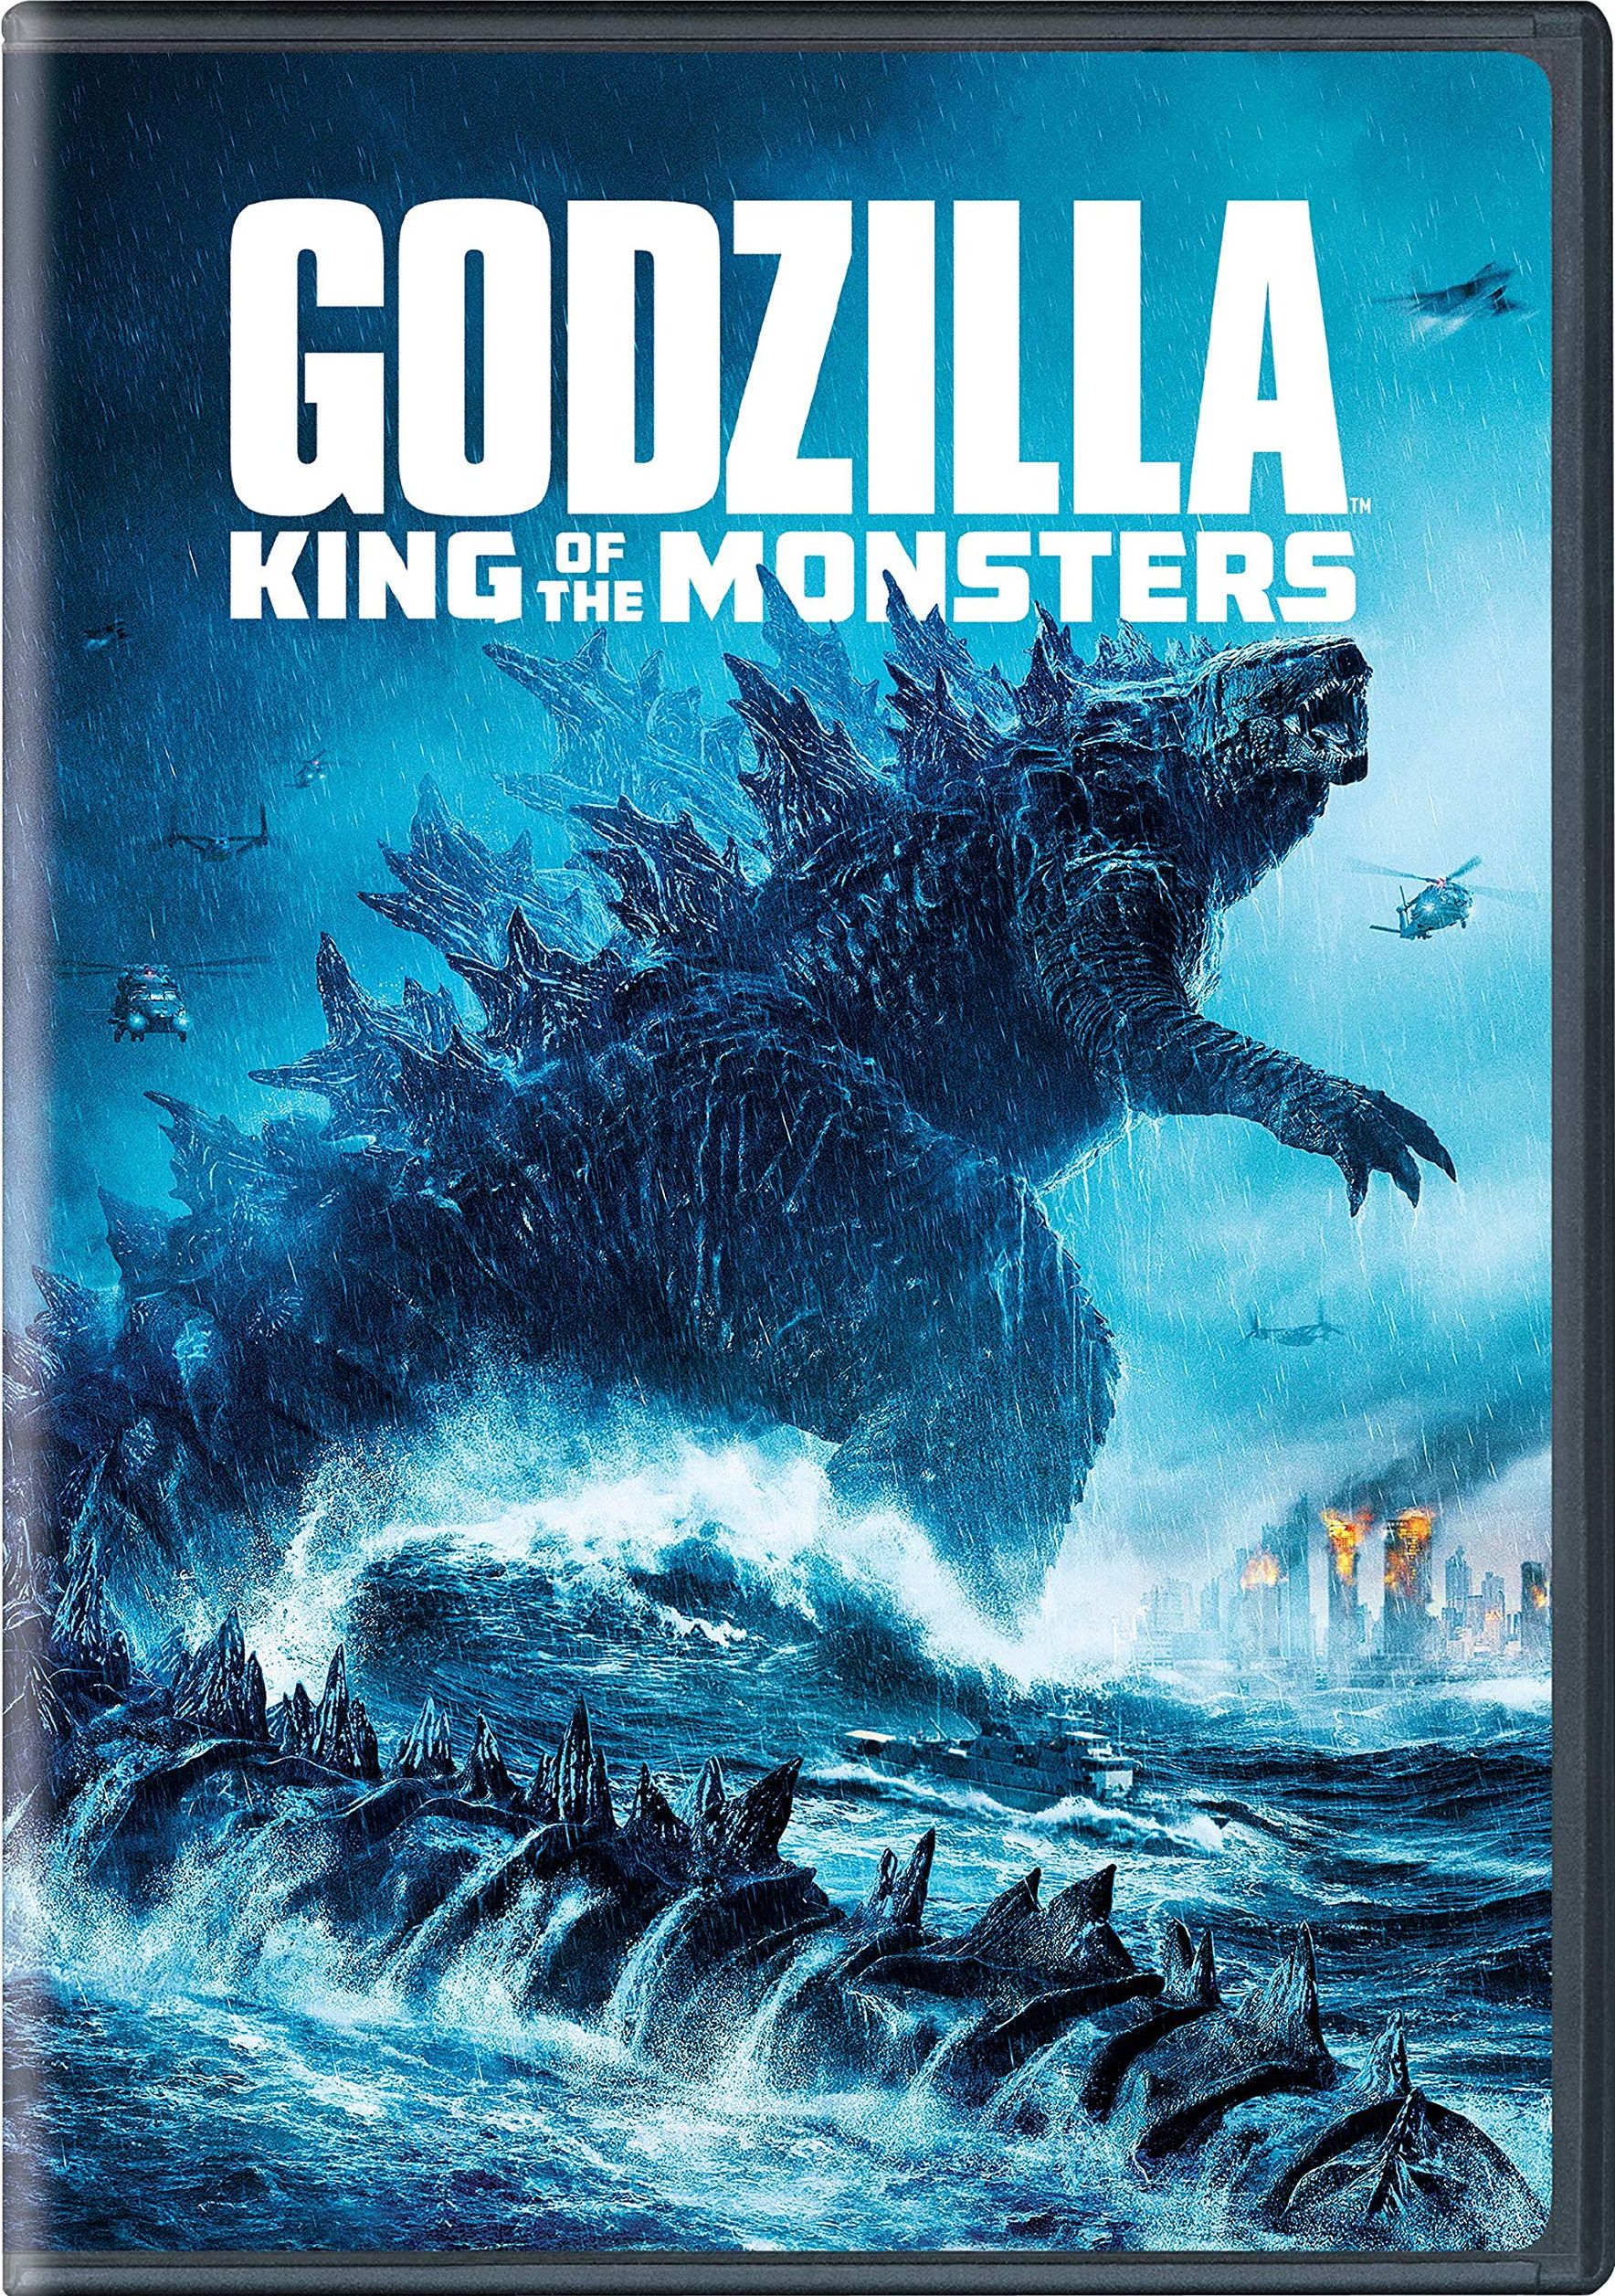 Godzilla King of the Monsters DVD Release Date August 27, 2019